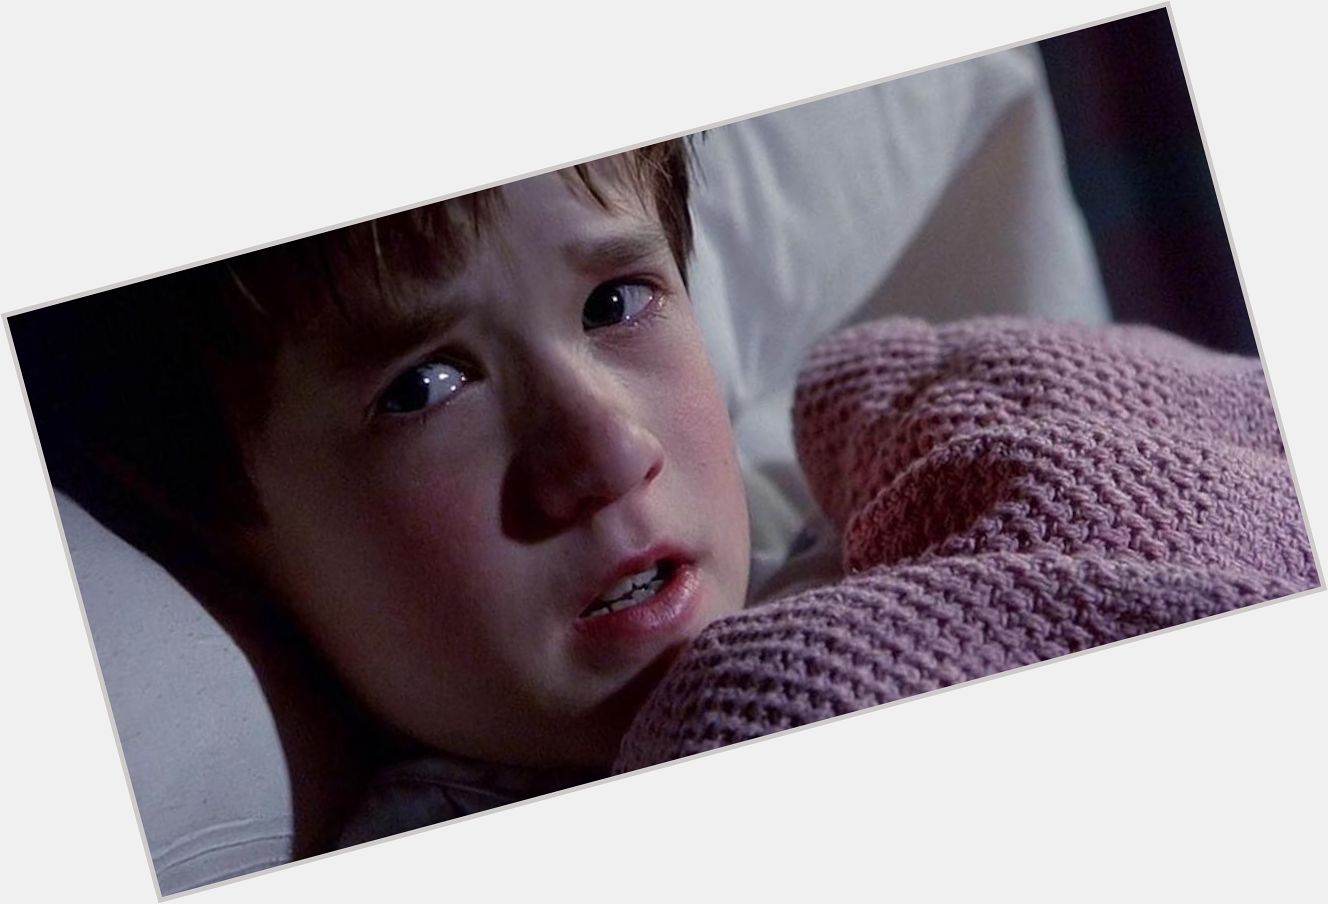 Happy birthday to the great Haley Joel Osment, whose Oscar nomination for The Sixth Sense is an all-timer 